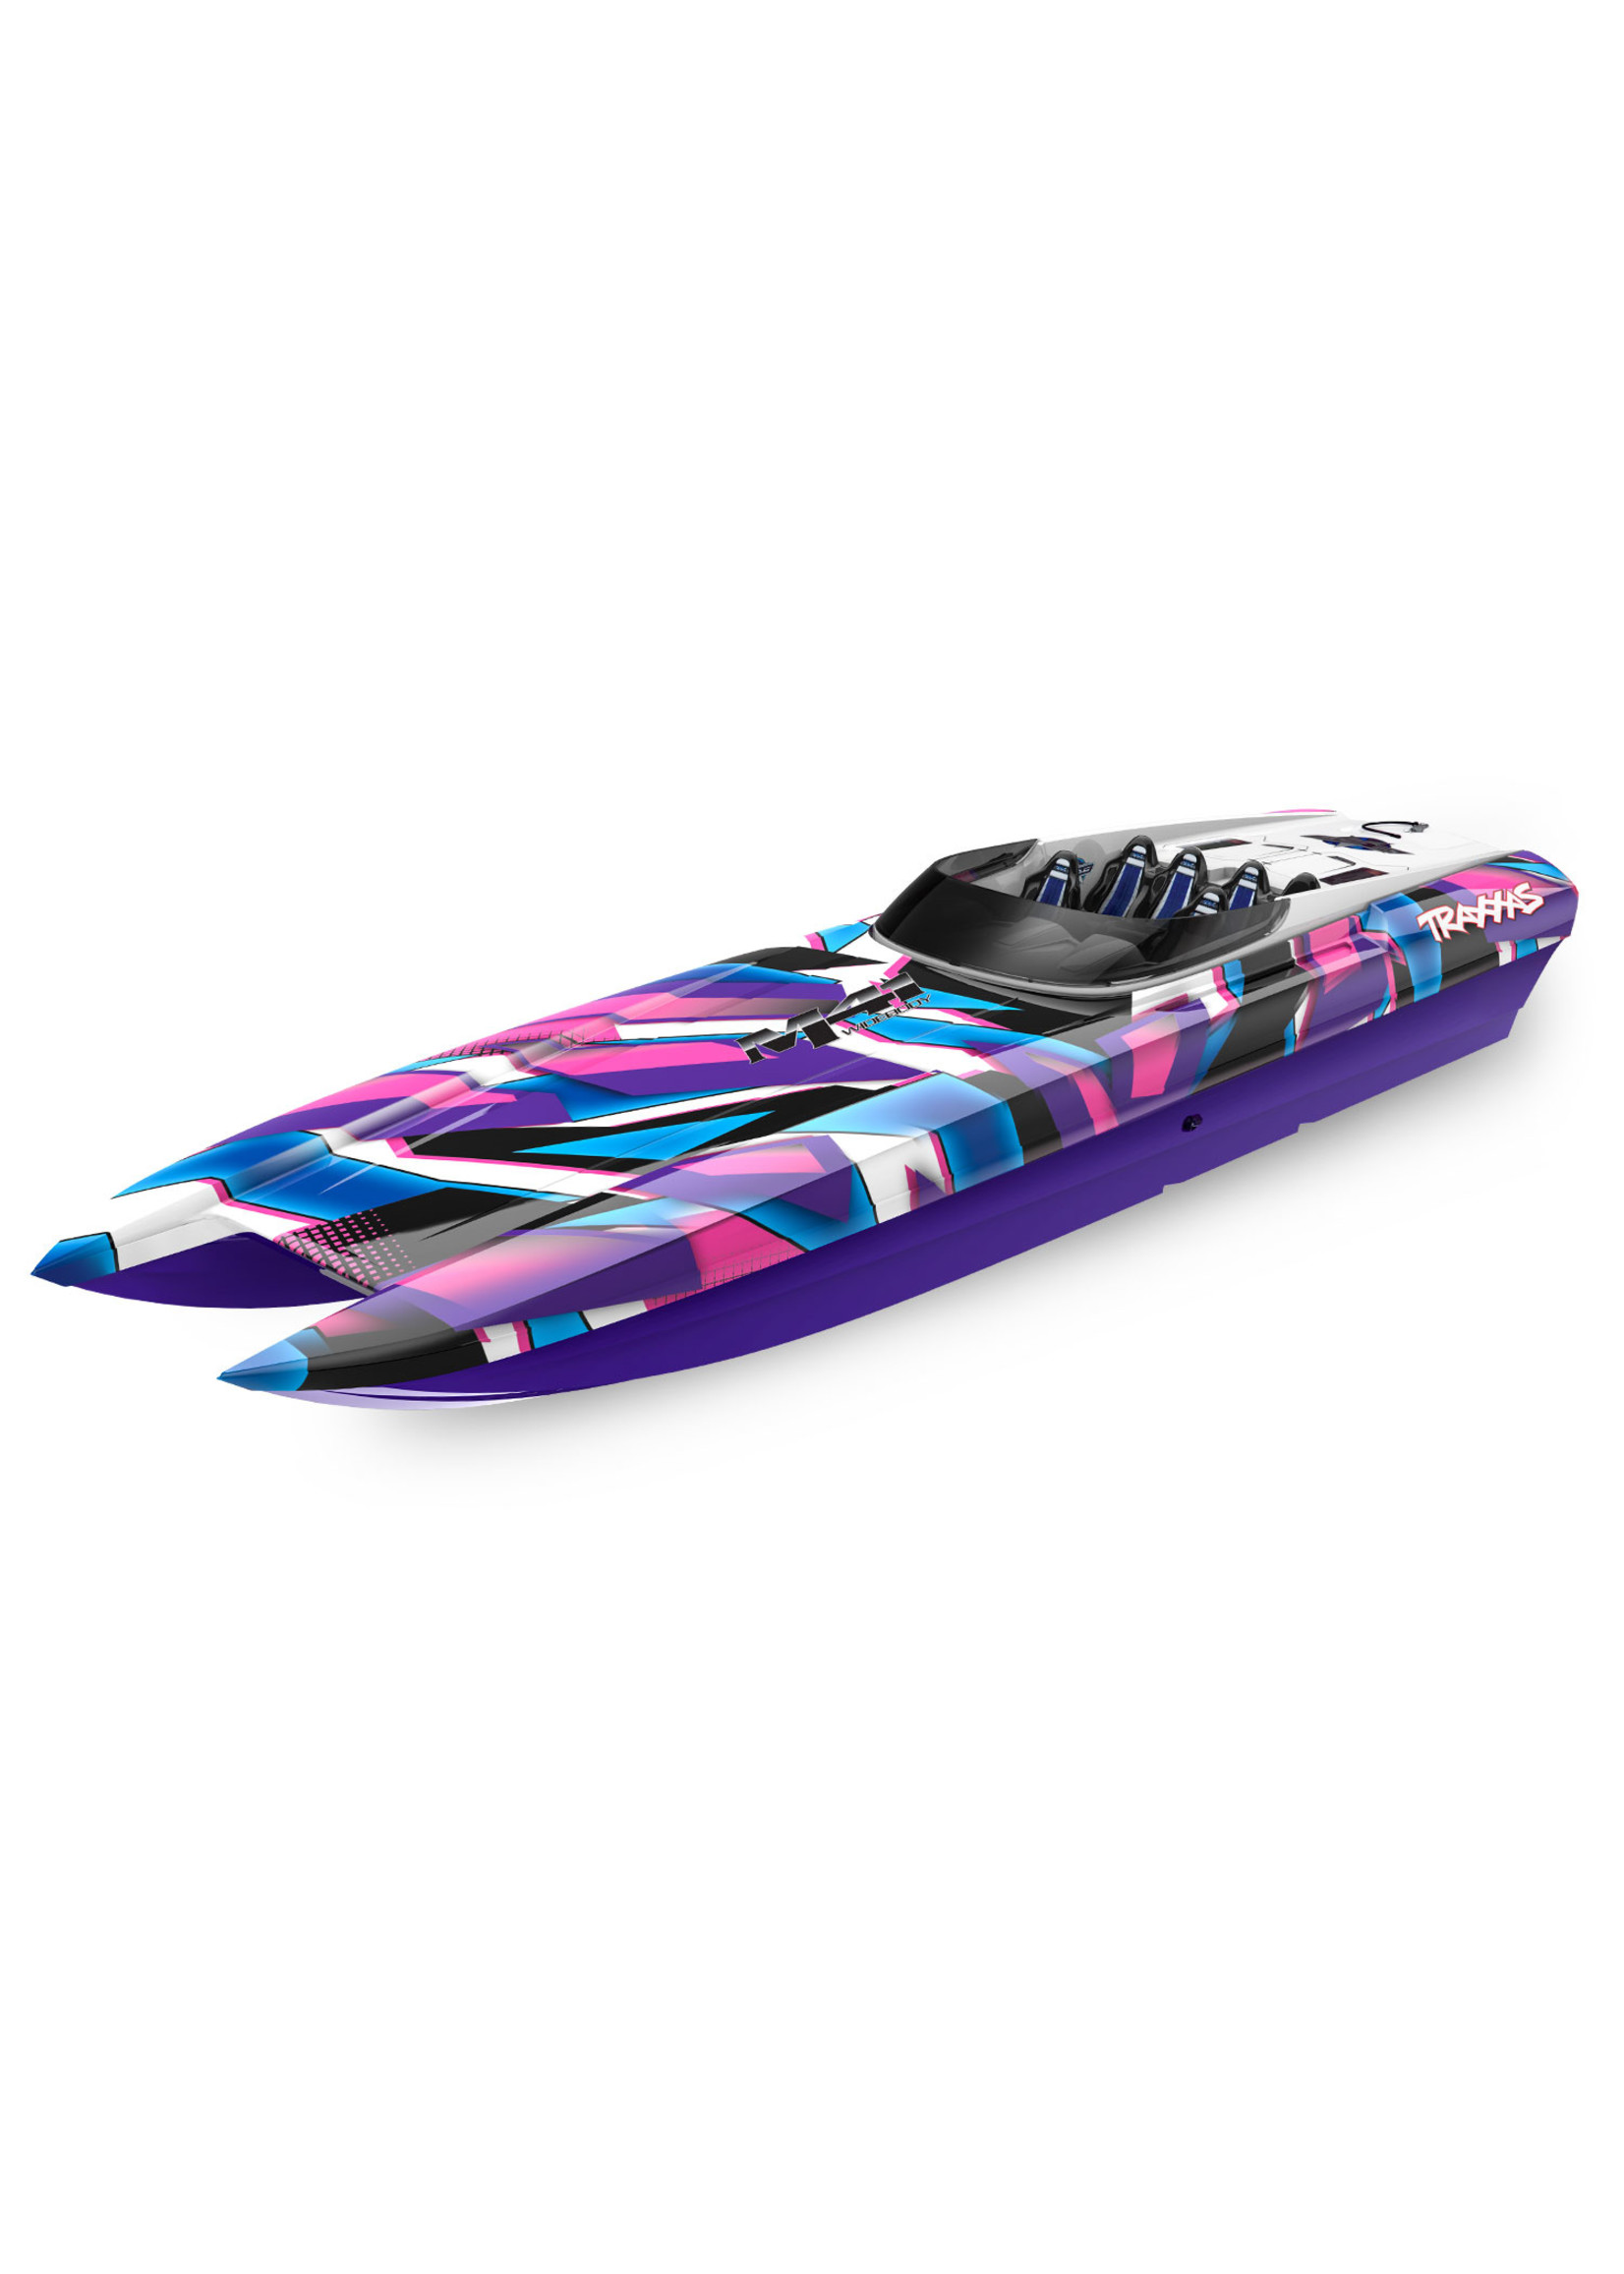 Traxxas TRA57046-4 Traxxas DCB M41 Widebody: Brushless 40' Race Boat with TQi Traxxas Link Enabled 2.4Ghz Radio System & Traxxas Stability Management (TSM)